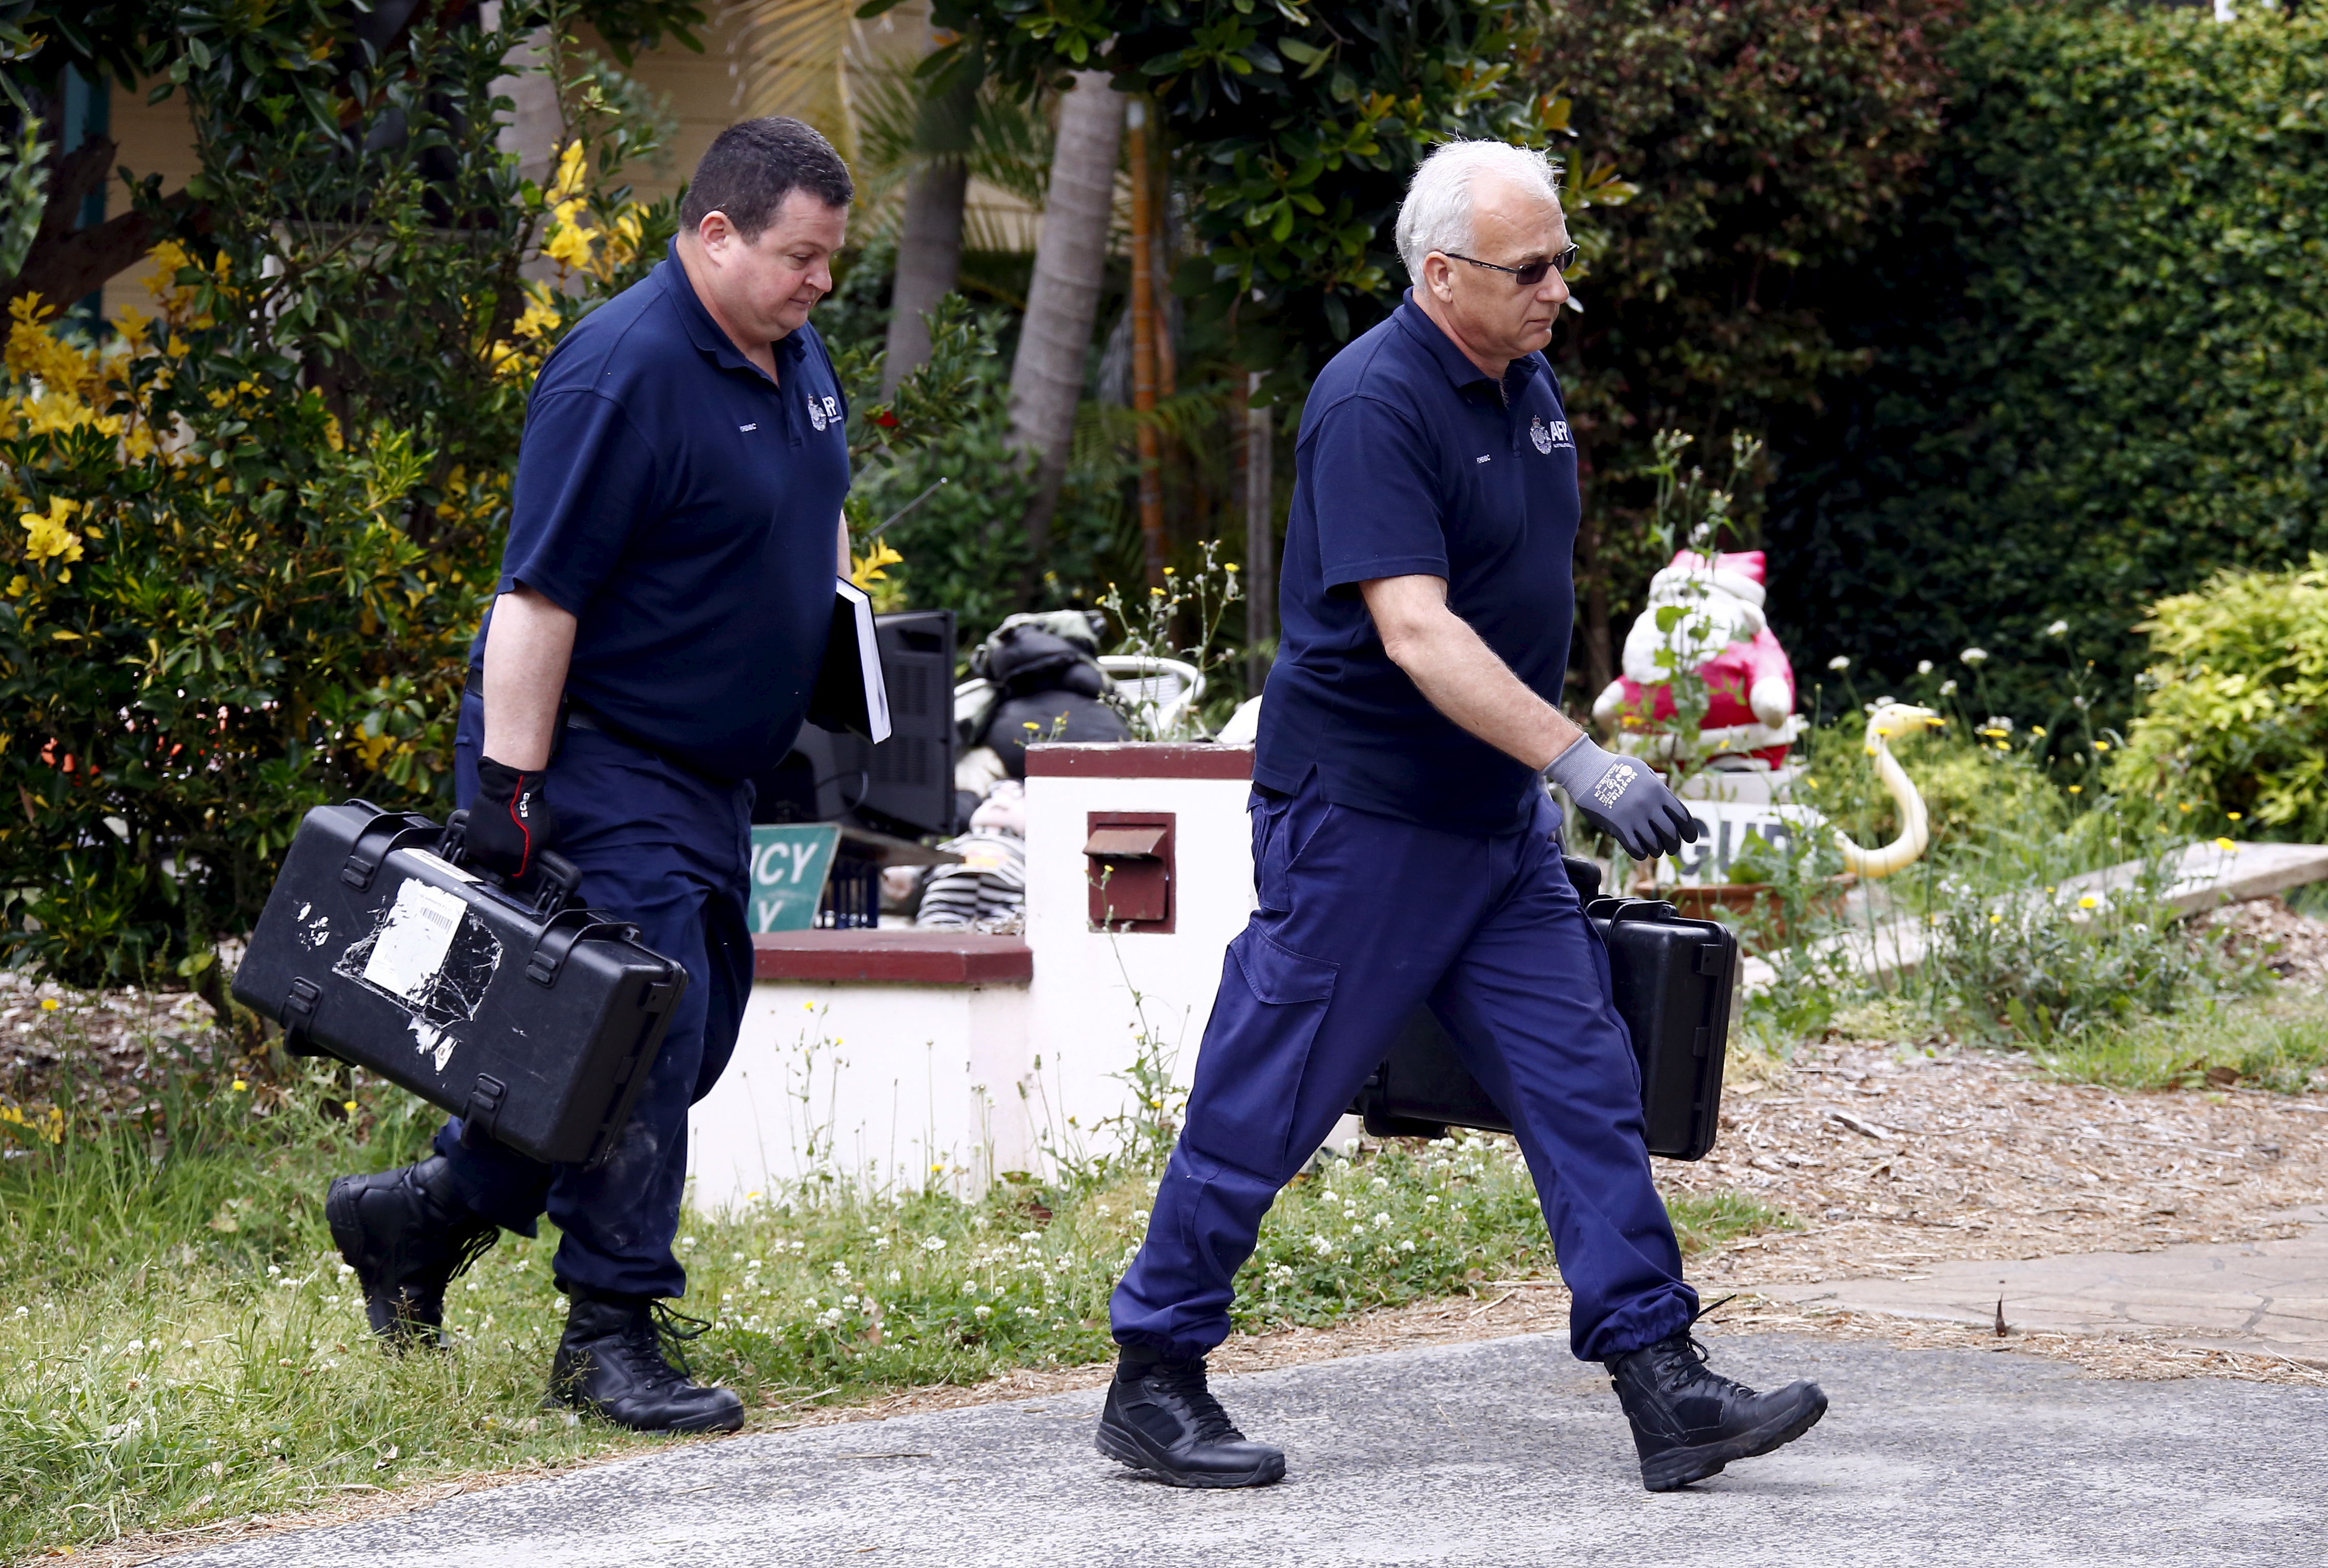 Federal police officers carry equipment into a house after arresting a man during early morning raids in western Sydney, Australia